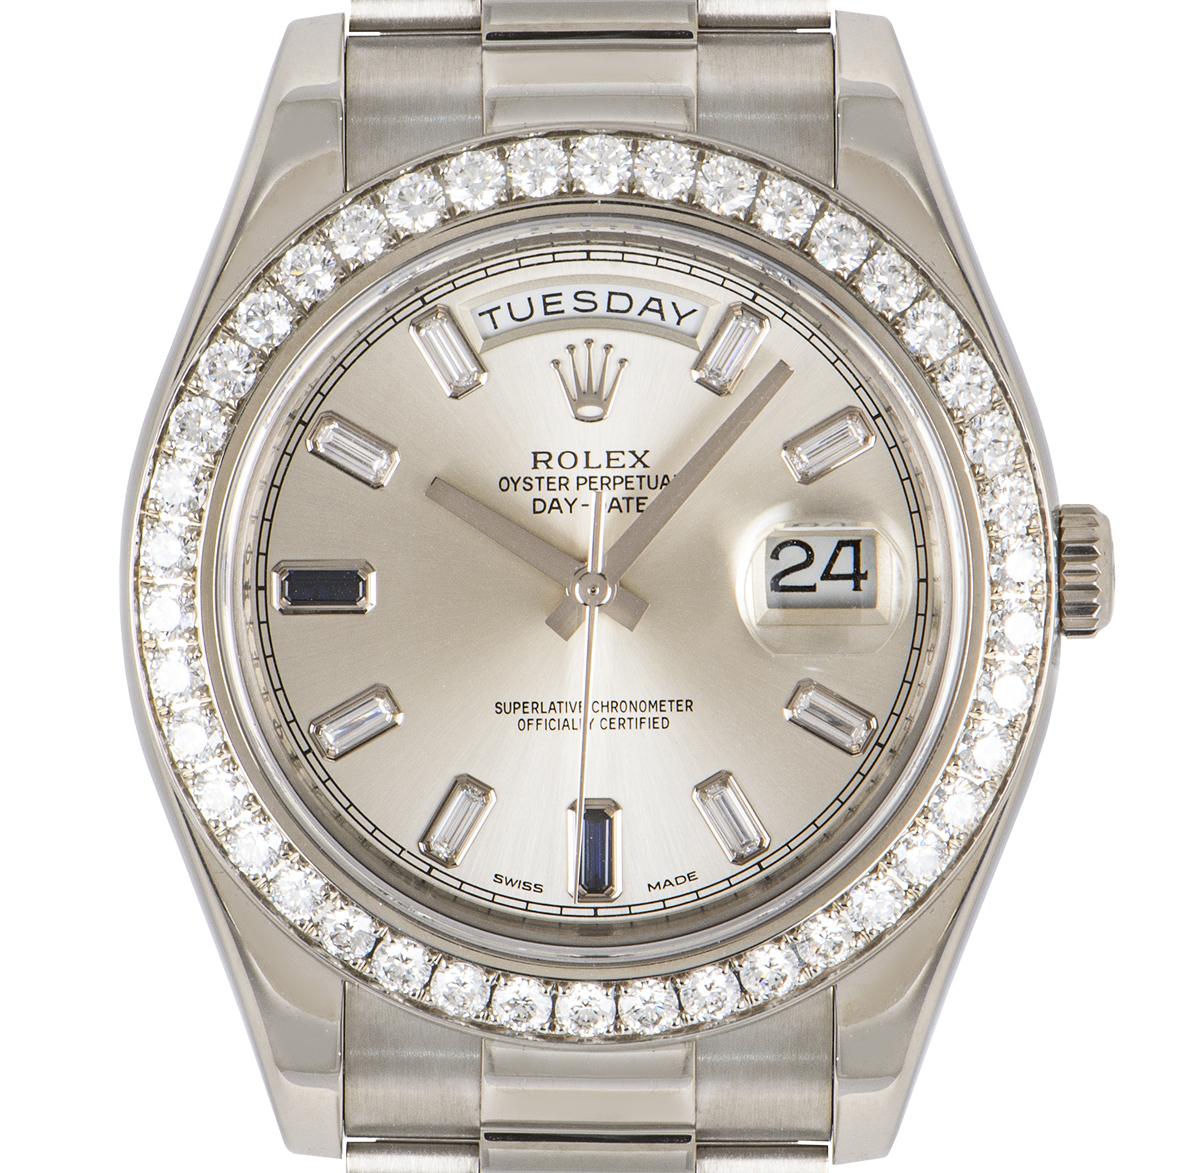 A mens Day-Date wristwatch crafted in white gold by Rolex. Featuring a silver dial with 8 baguette cut diamonds and 2 baguette cut sapphires. Complementing the dial is a white gold fixed bezel set with 42 round brilliant diamonds.

Equipped with a